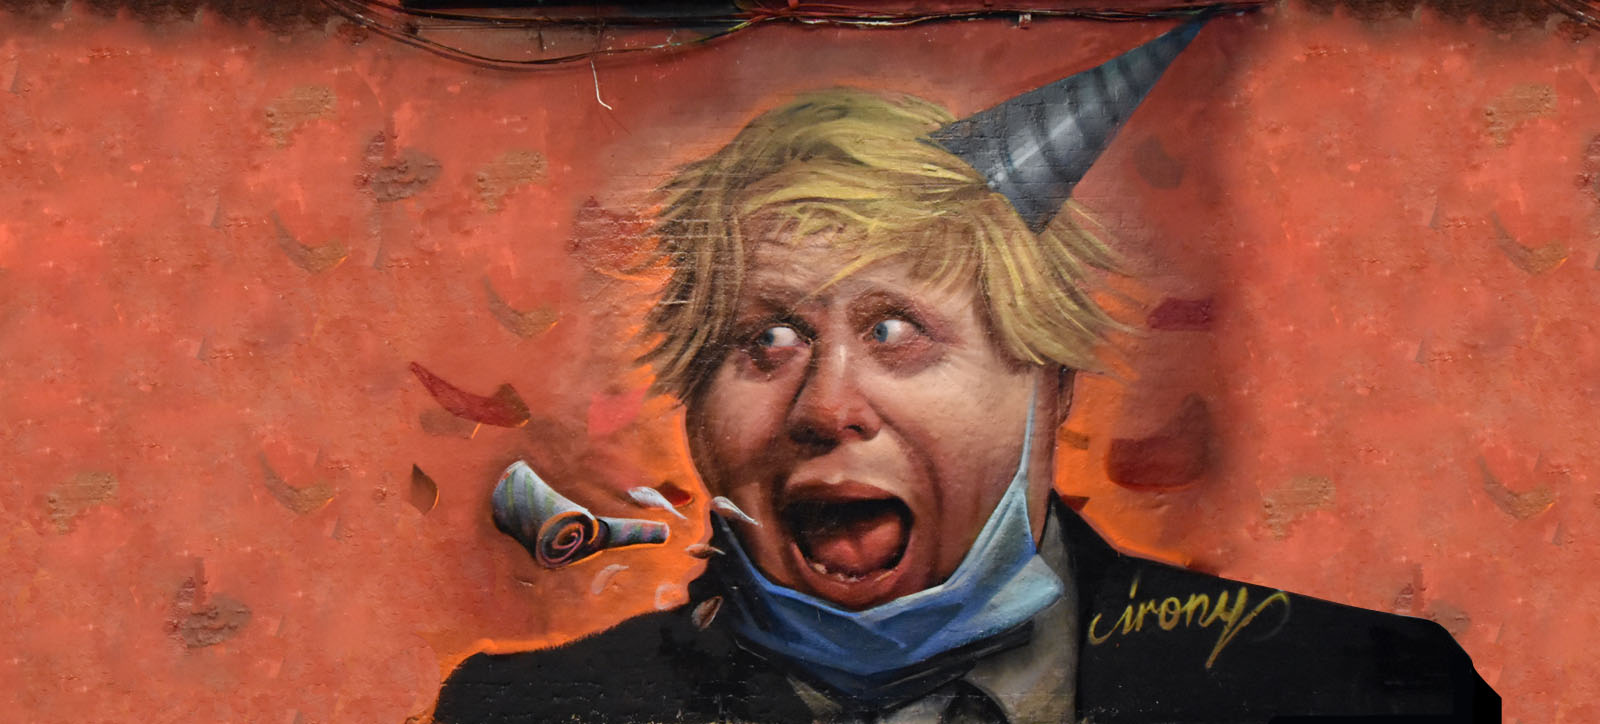 A mural of UK Prime Minister Boris Johnson wearing a party hat with his facemask pulled down, satirising the pandemic response and 'partygate' scandal